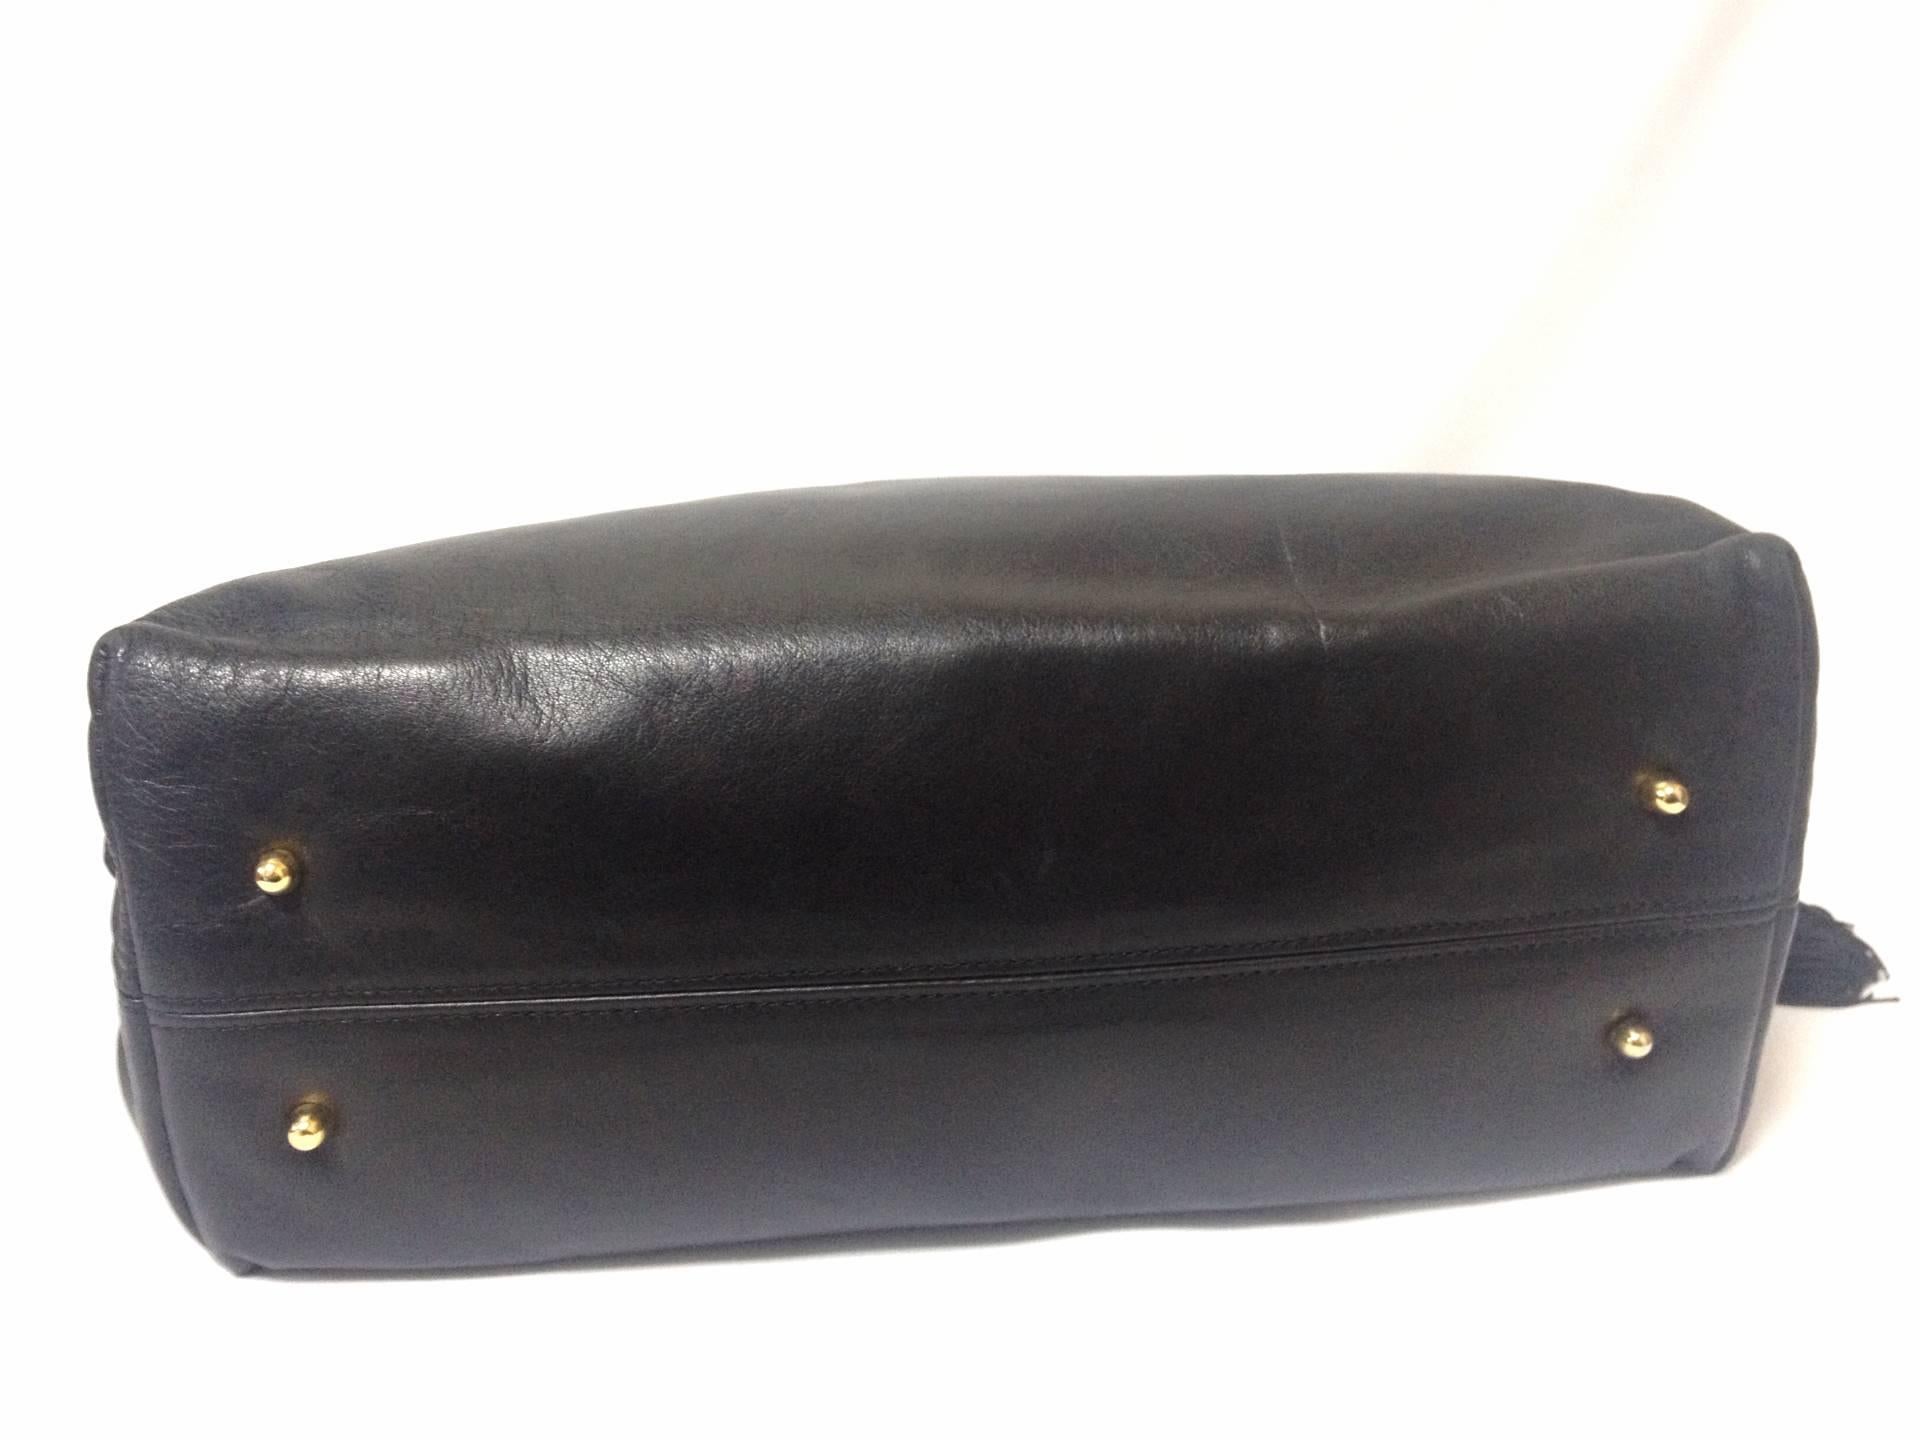 Vintage VALENTINO sac black nappa leather bolide style bag with a large V logo 1